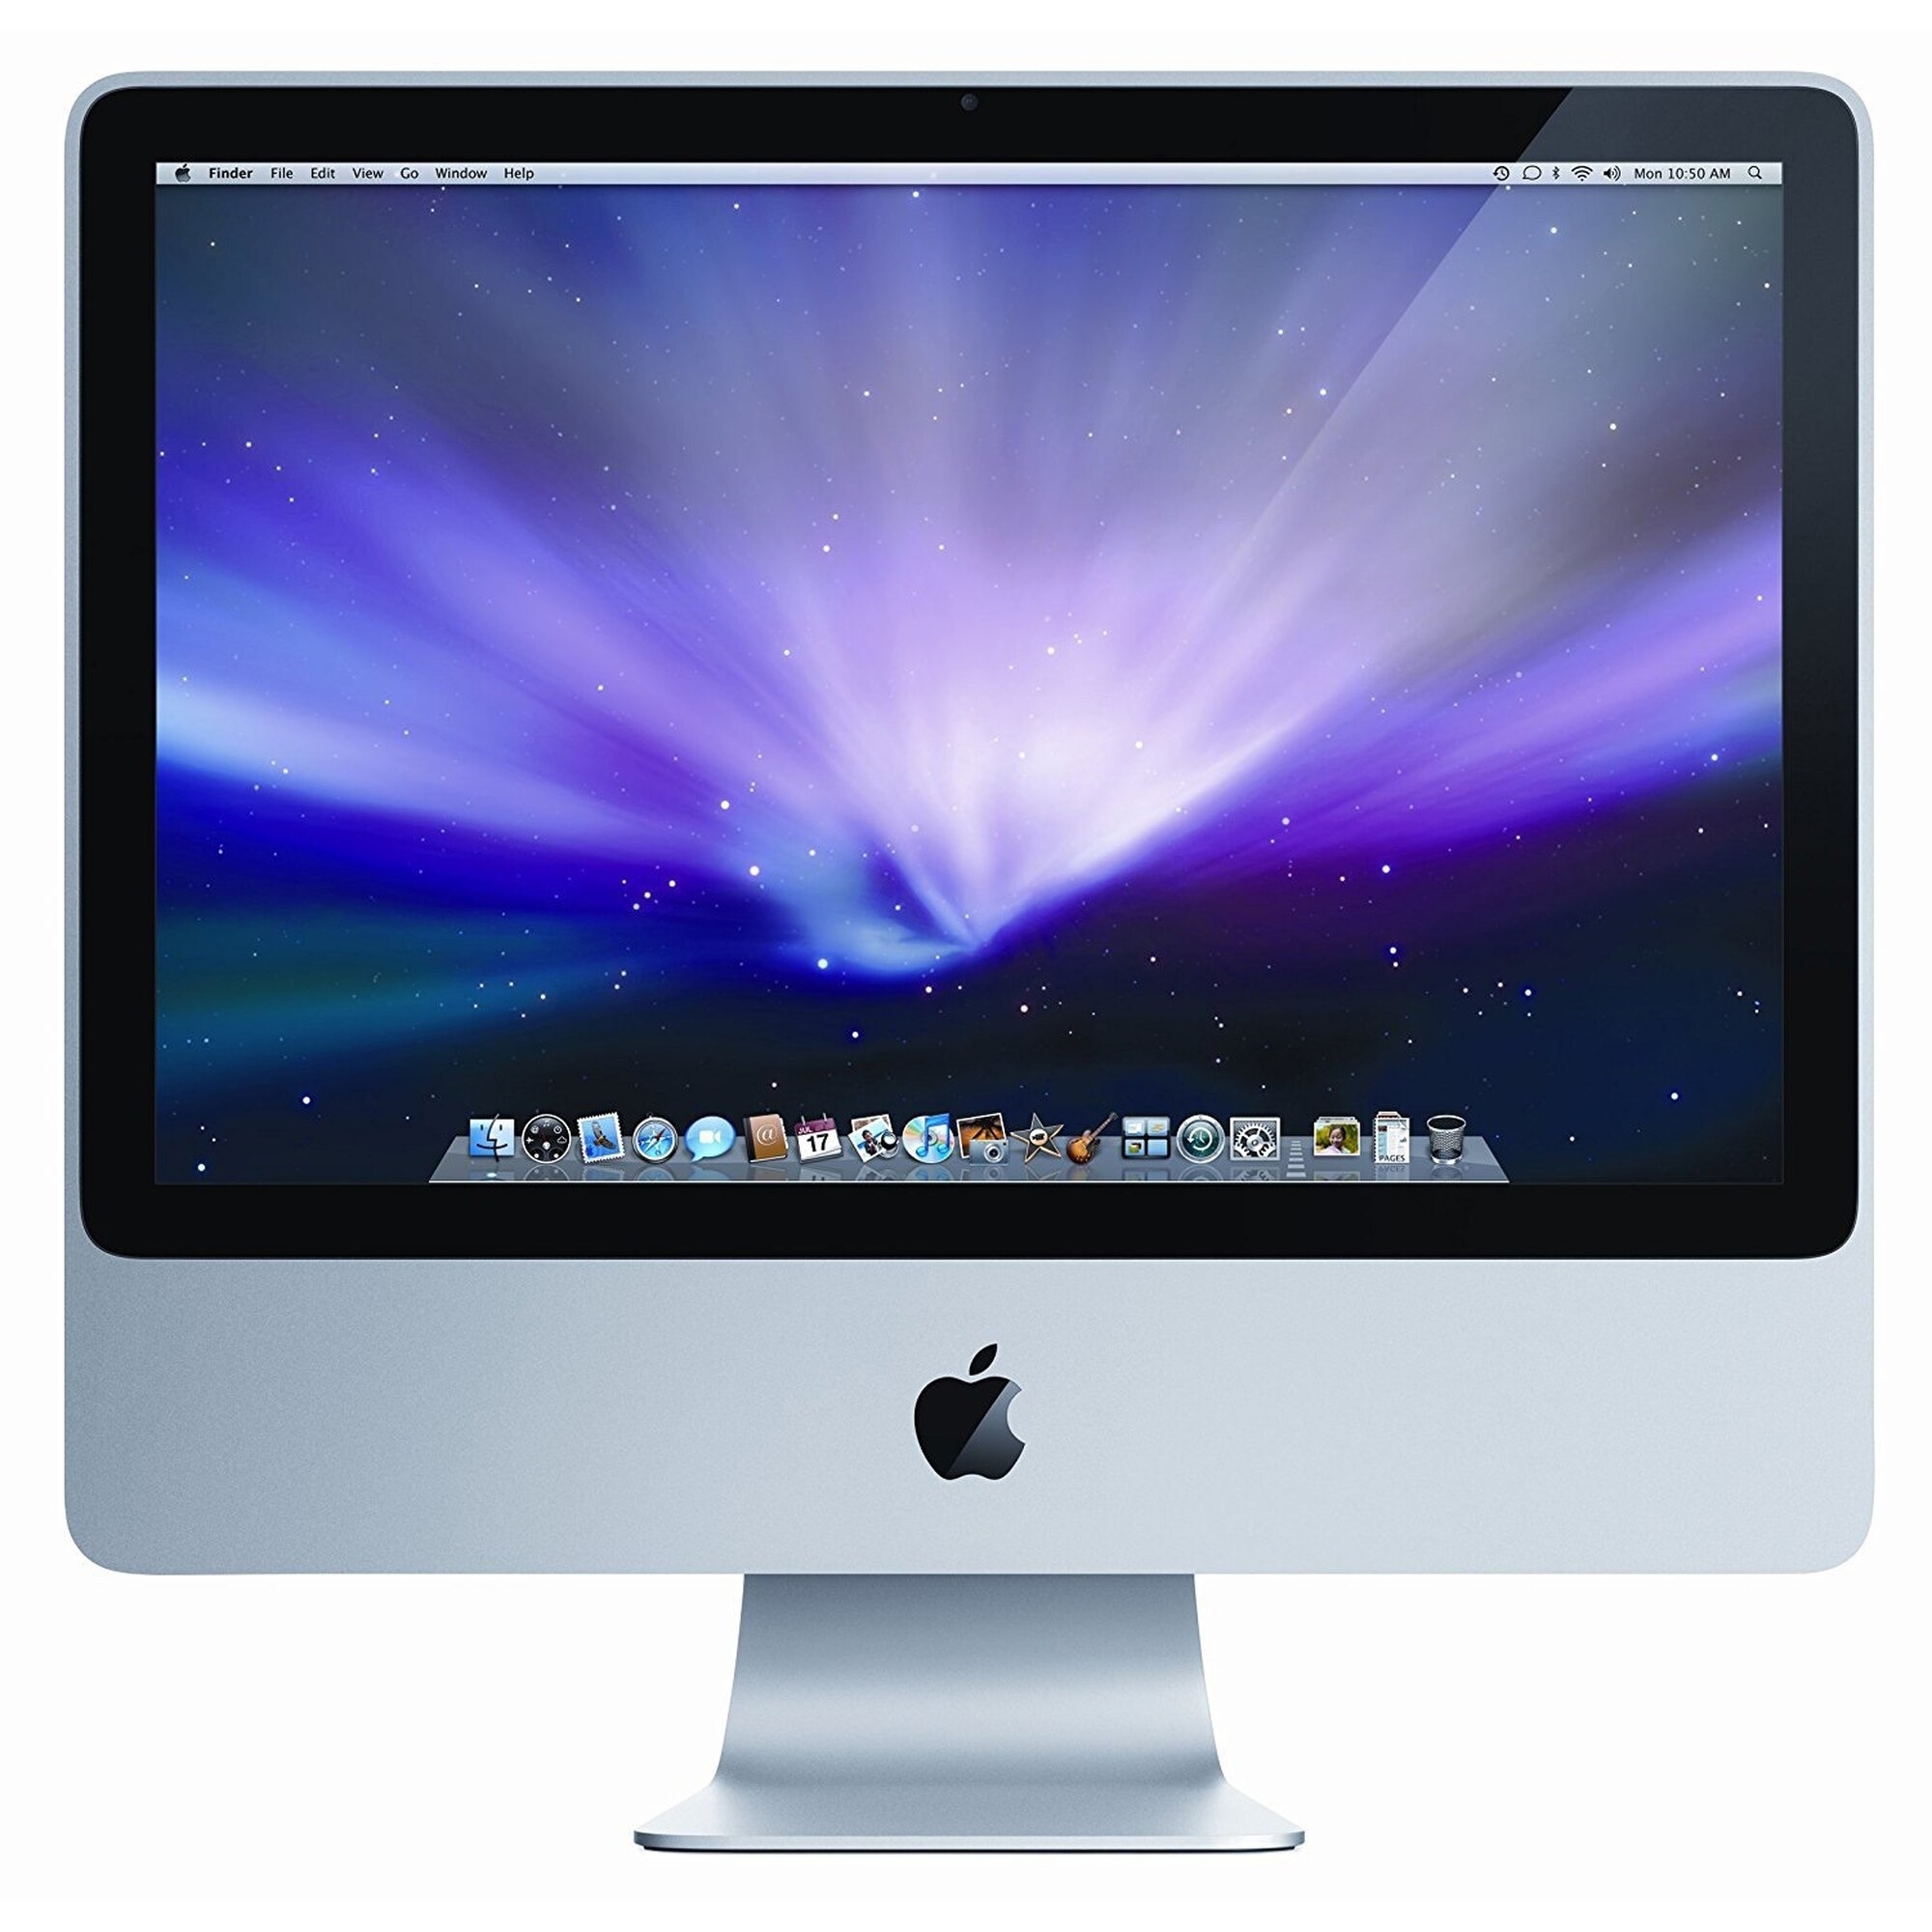 Apple iMac MC015LL/A 20" 1GB 160GB Intel Core Duo P7350 X2&nbsp;2GHz MacOSX,&nbsp;Silver&nbsp; (Scratch And Dent Used) - image 2 of 3